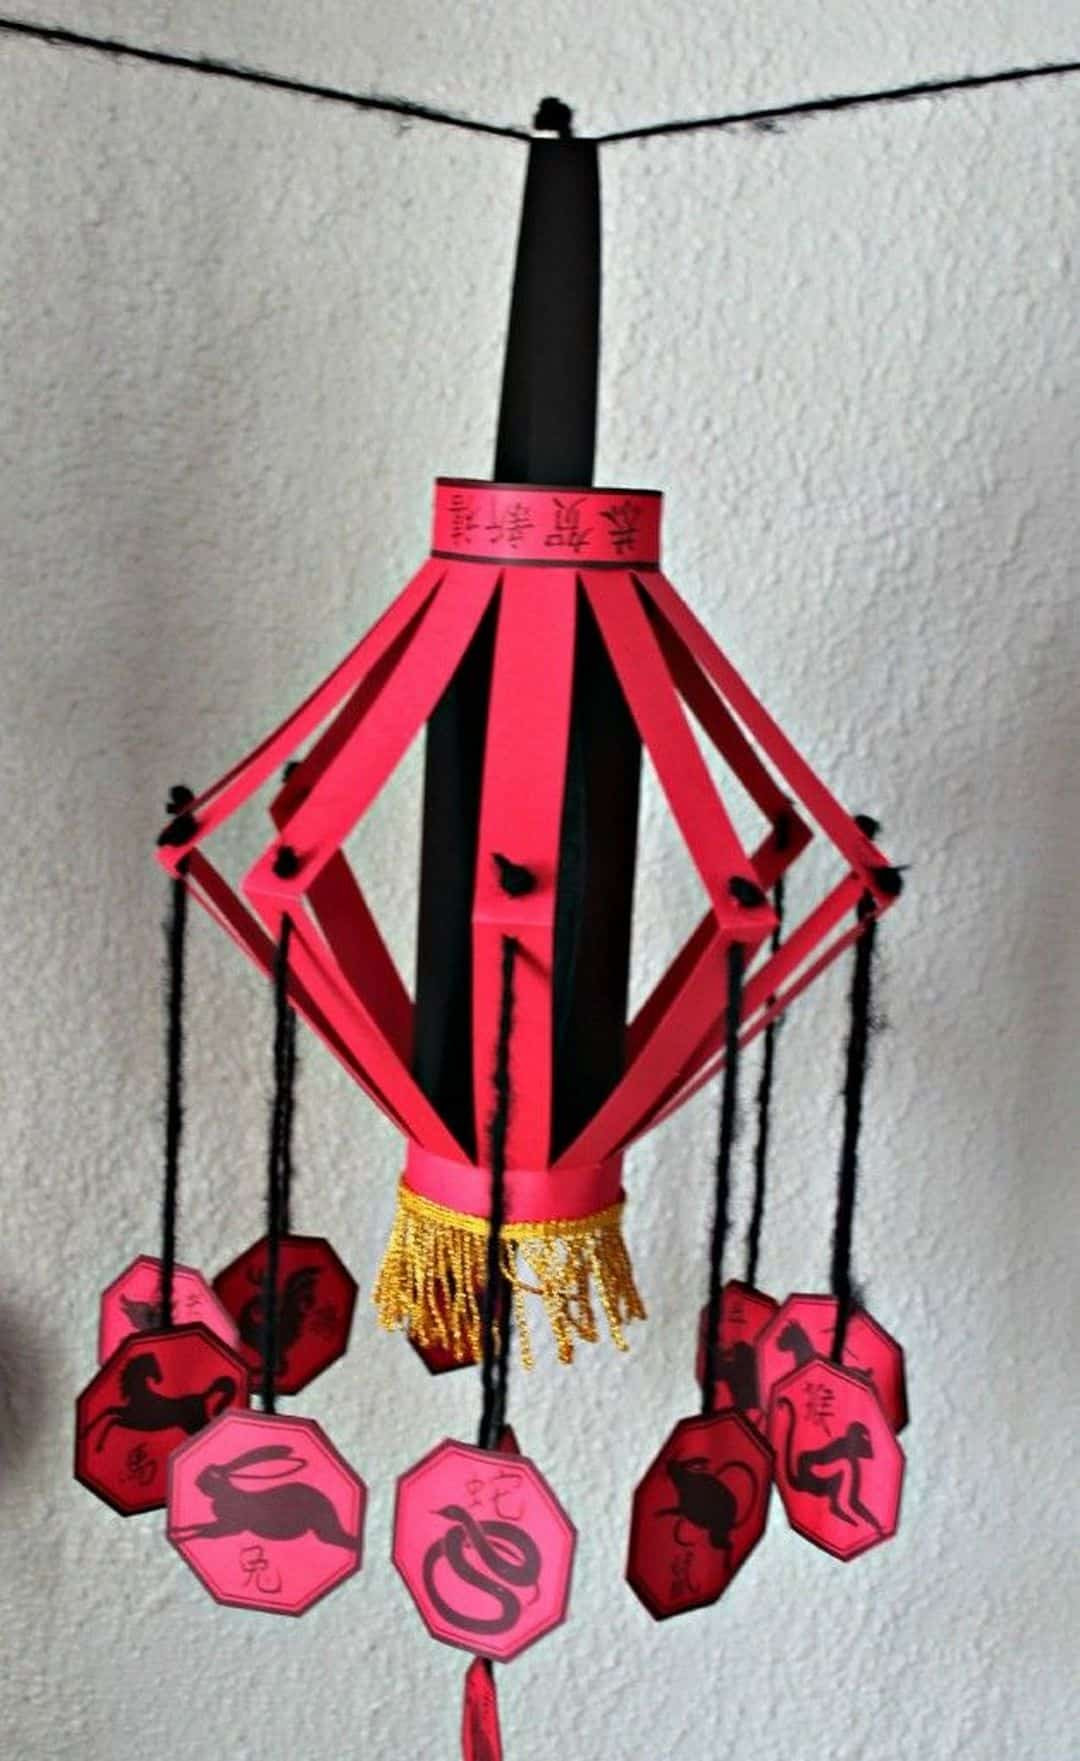 DIY Chinese New Year Decoration
 53 Cool DIY Chinese New Year Decoration Ideas – Futurist